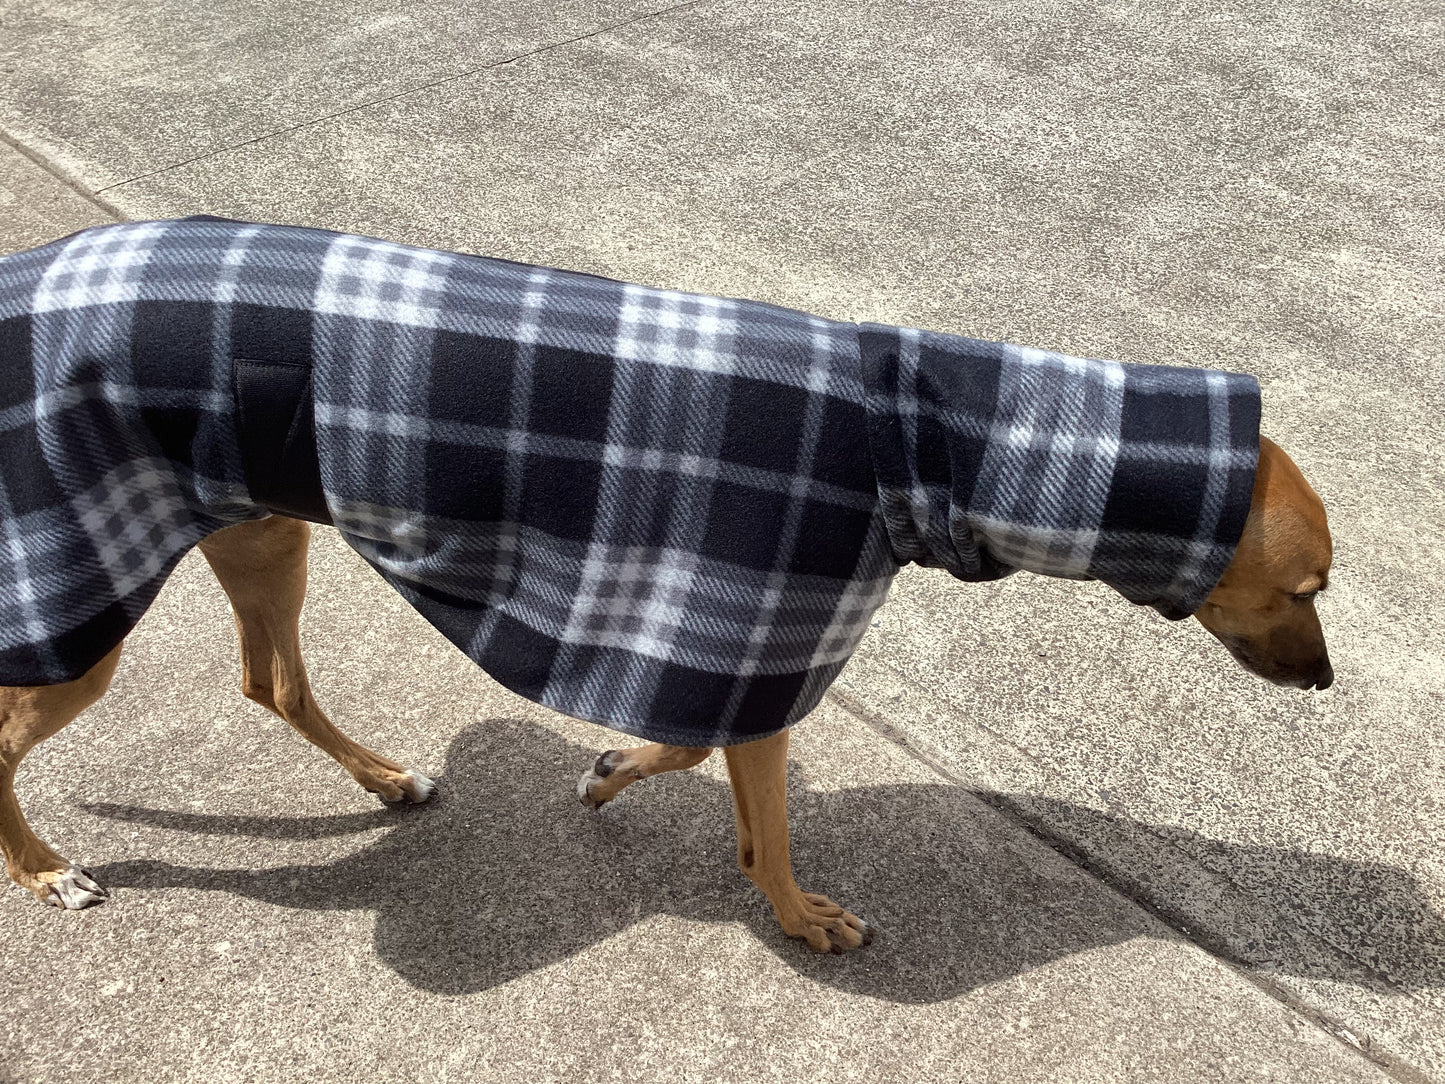 Black and grey check tartan winter deluxe style greyhound coat in double fleece with extra wide neck roll